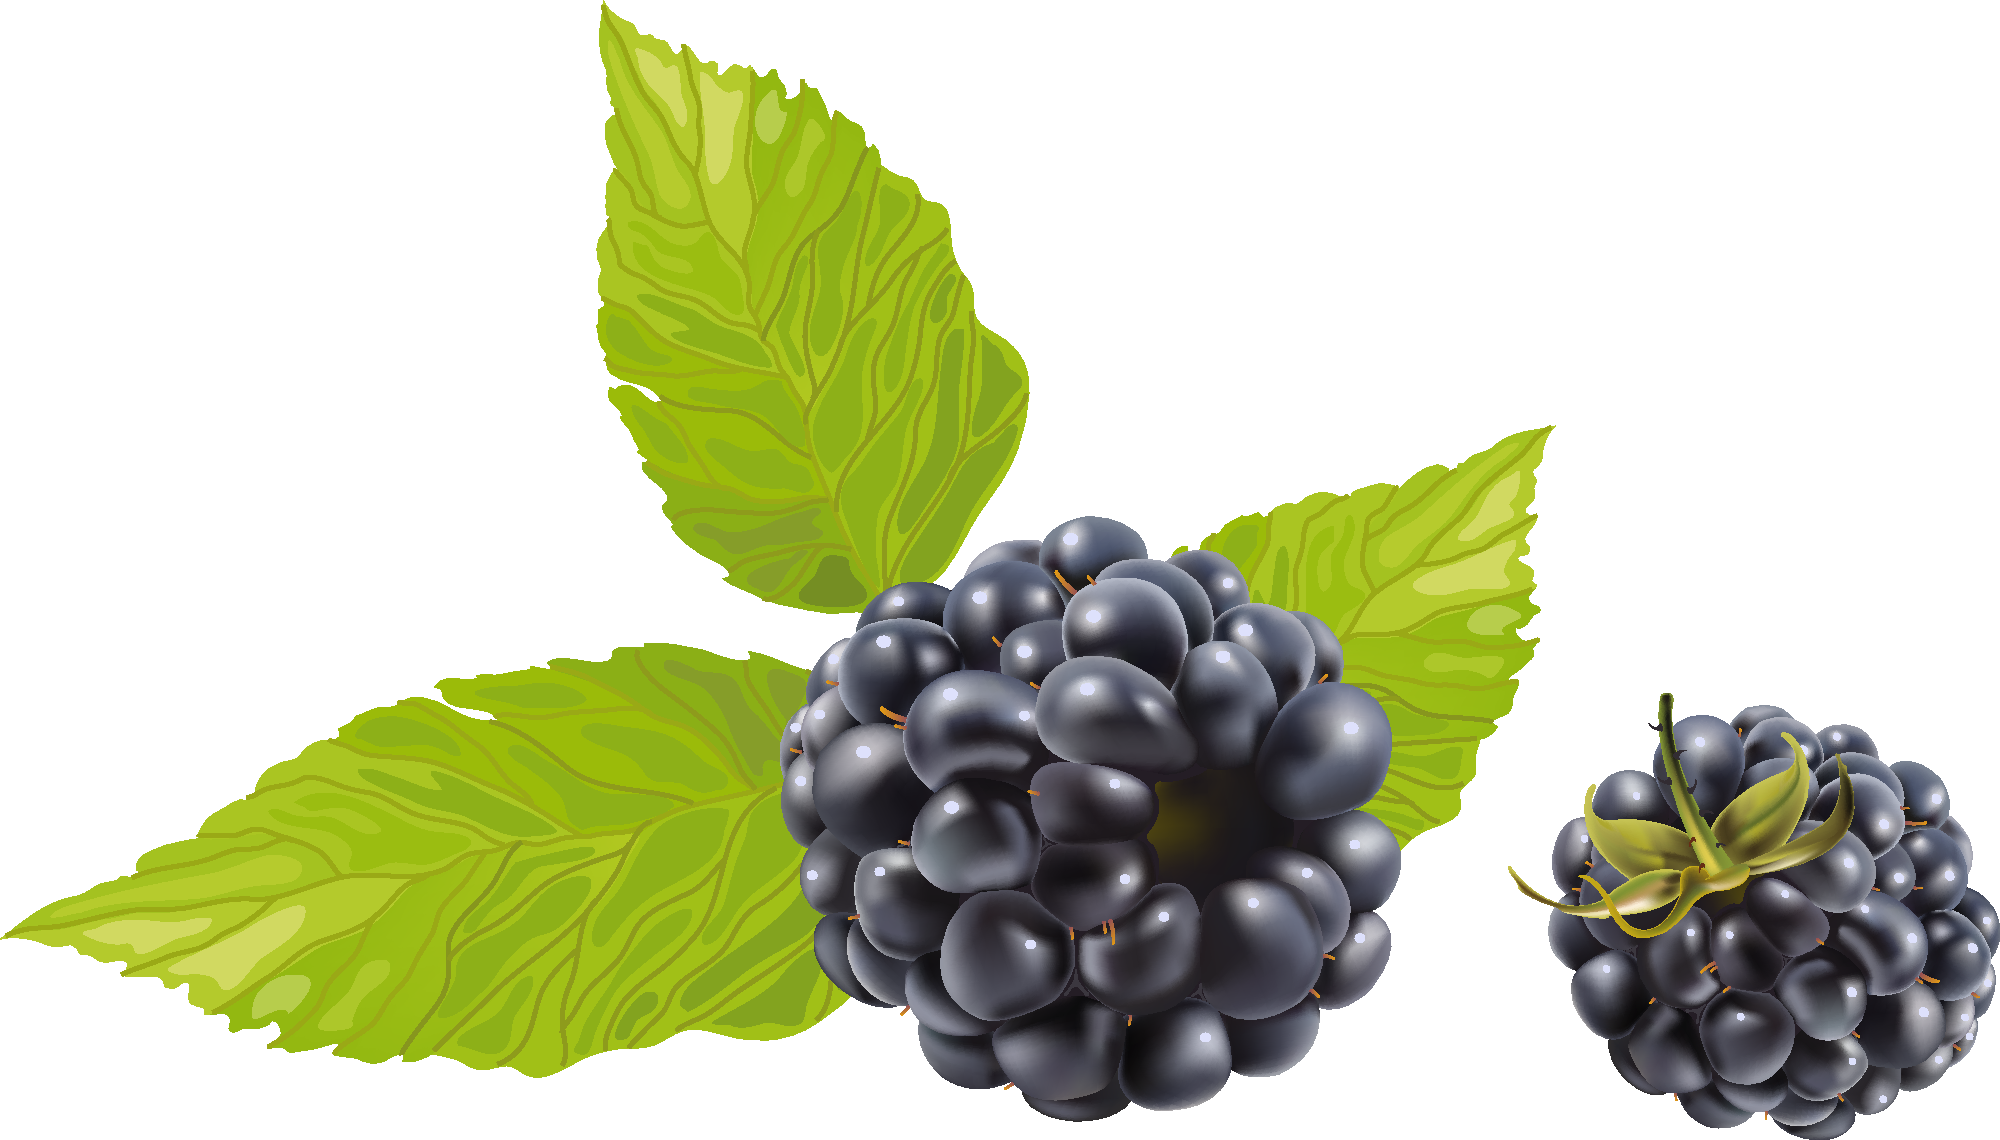 Blackberry with Leaves PNG Image